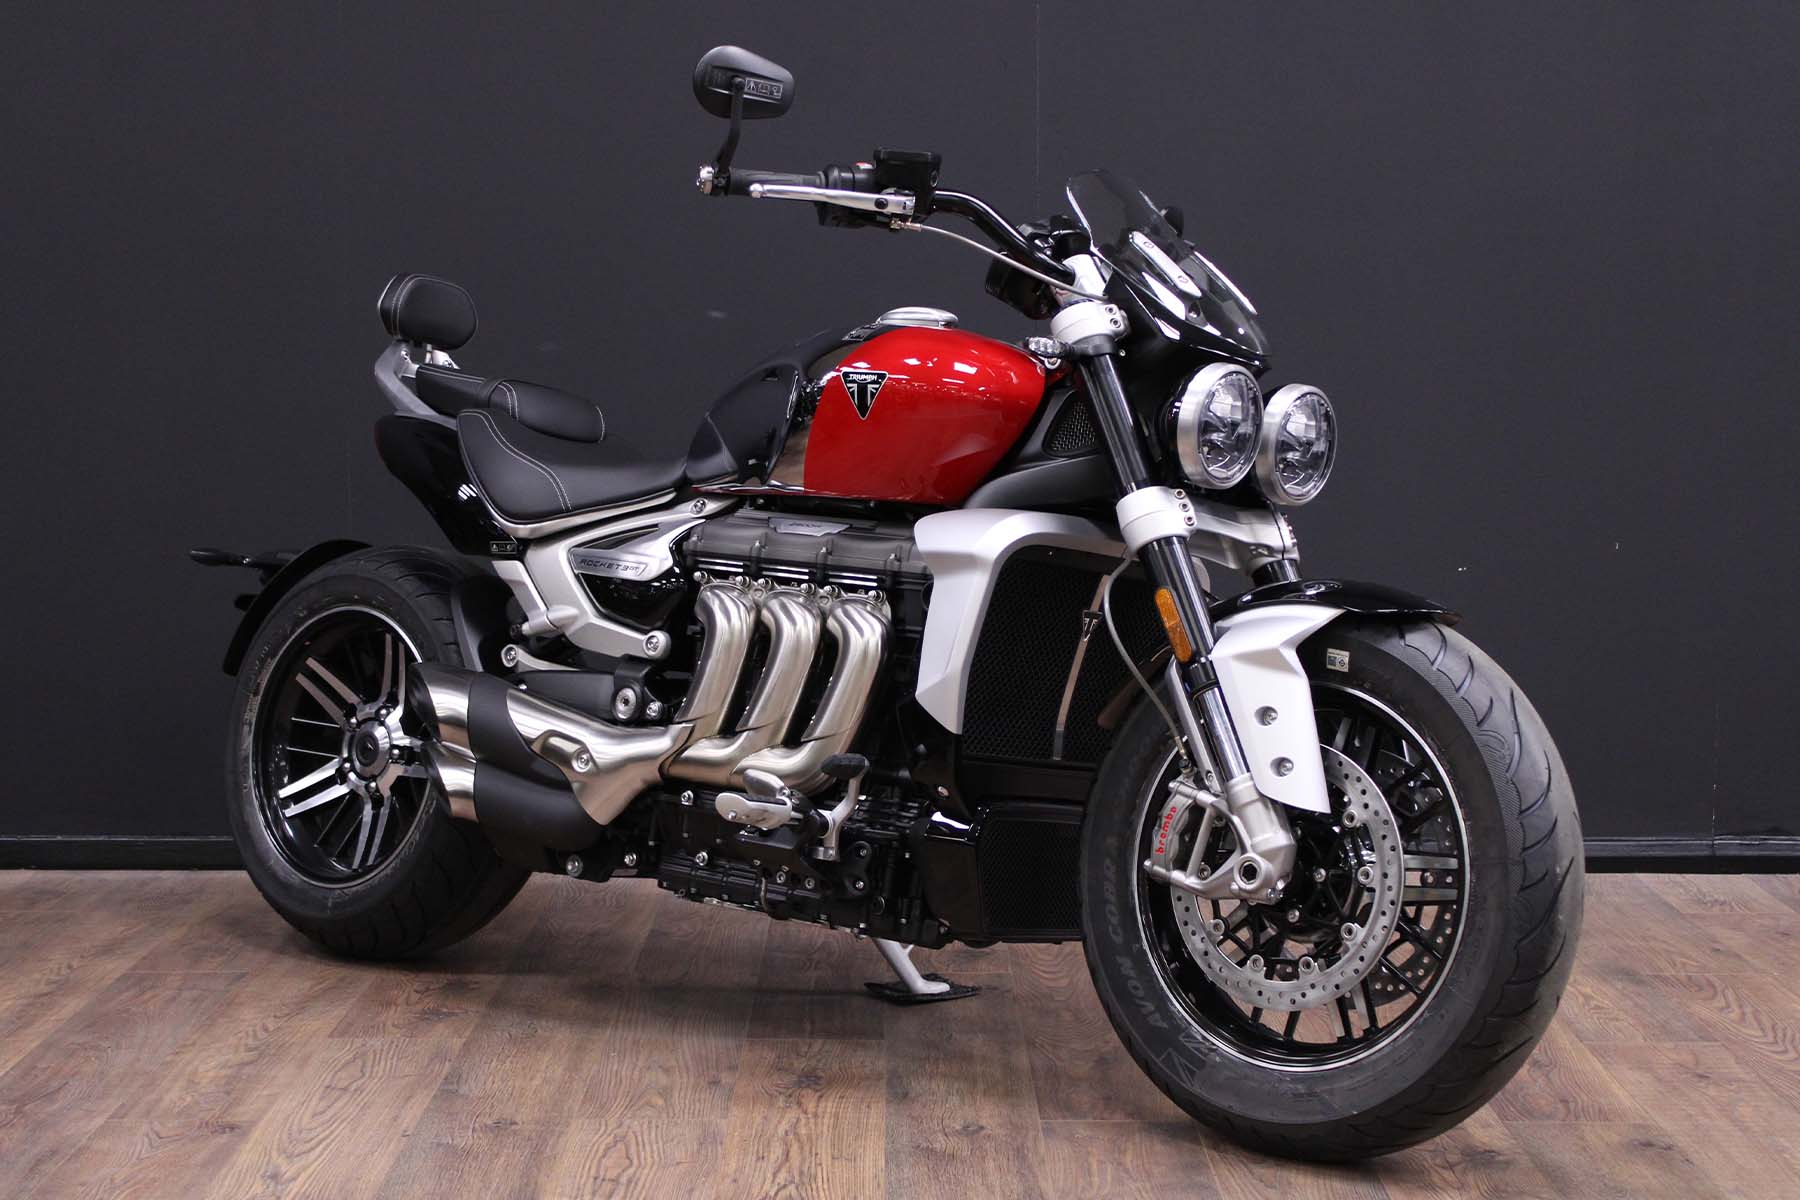 Triumph Rocket Chrome Edition now available and in stock at Laguna Triumph Maidstone